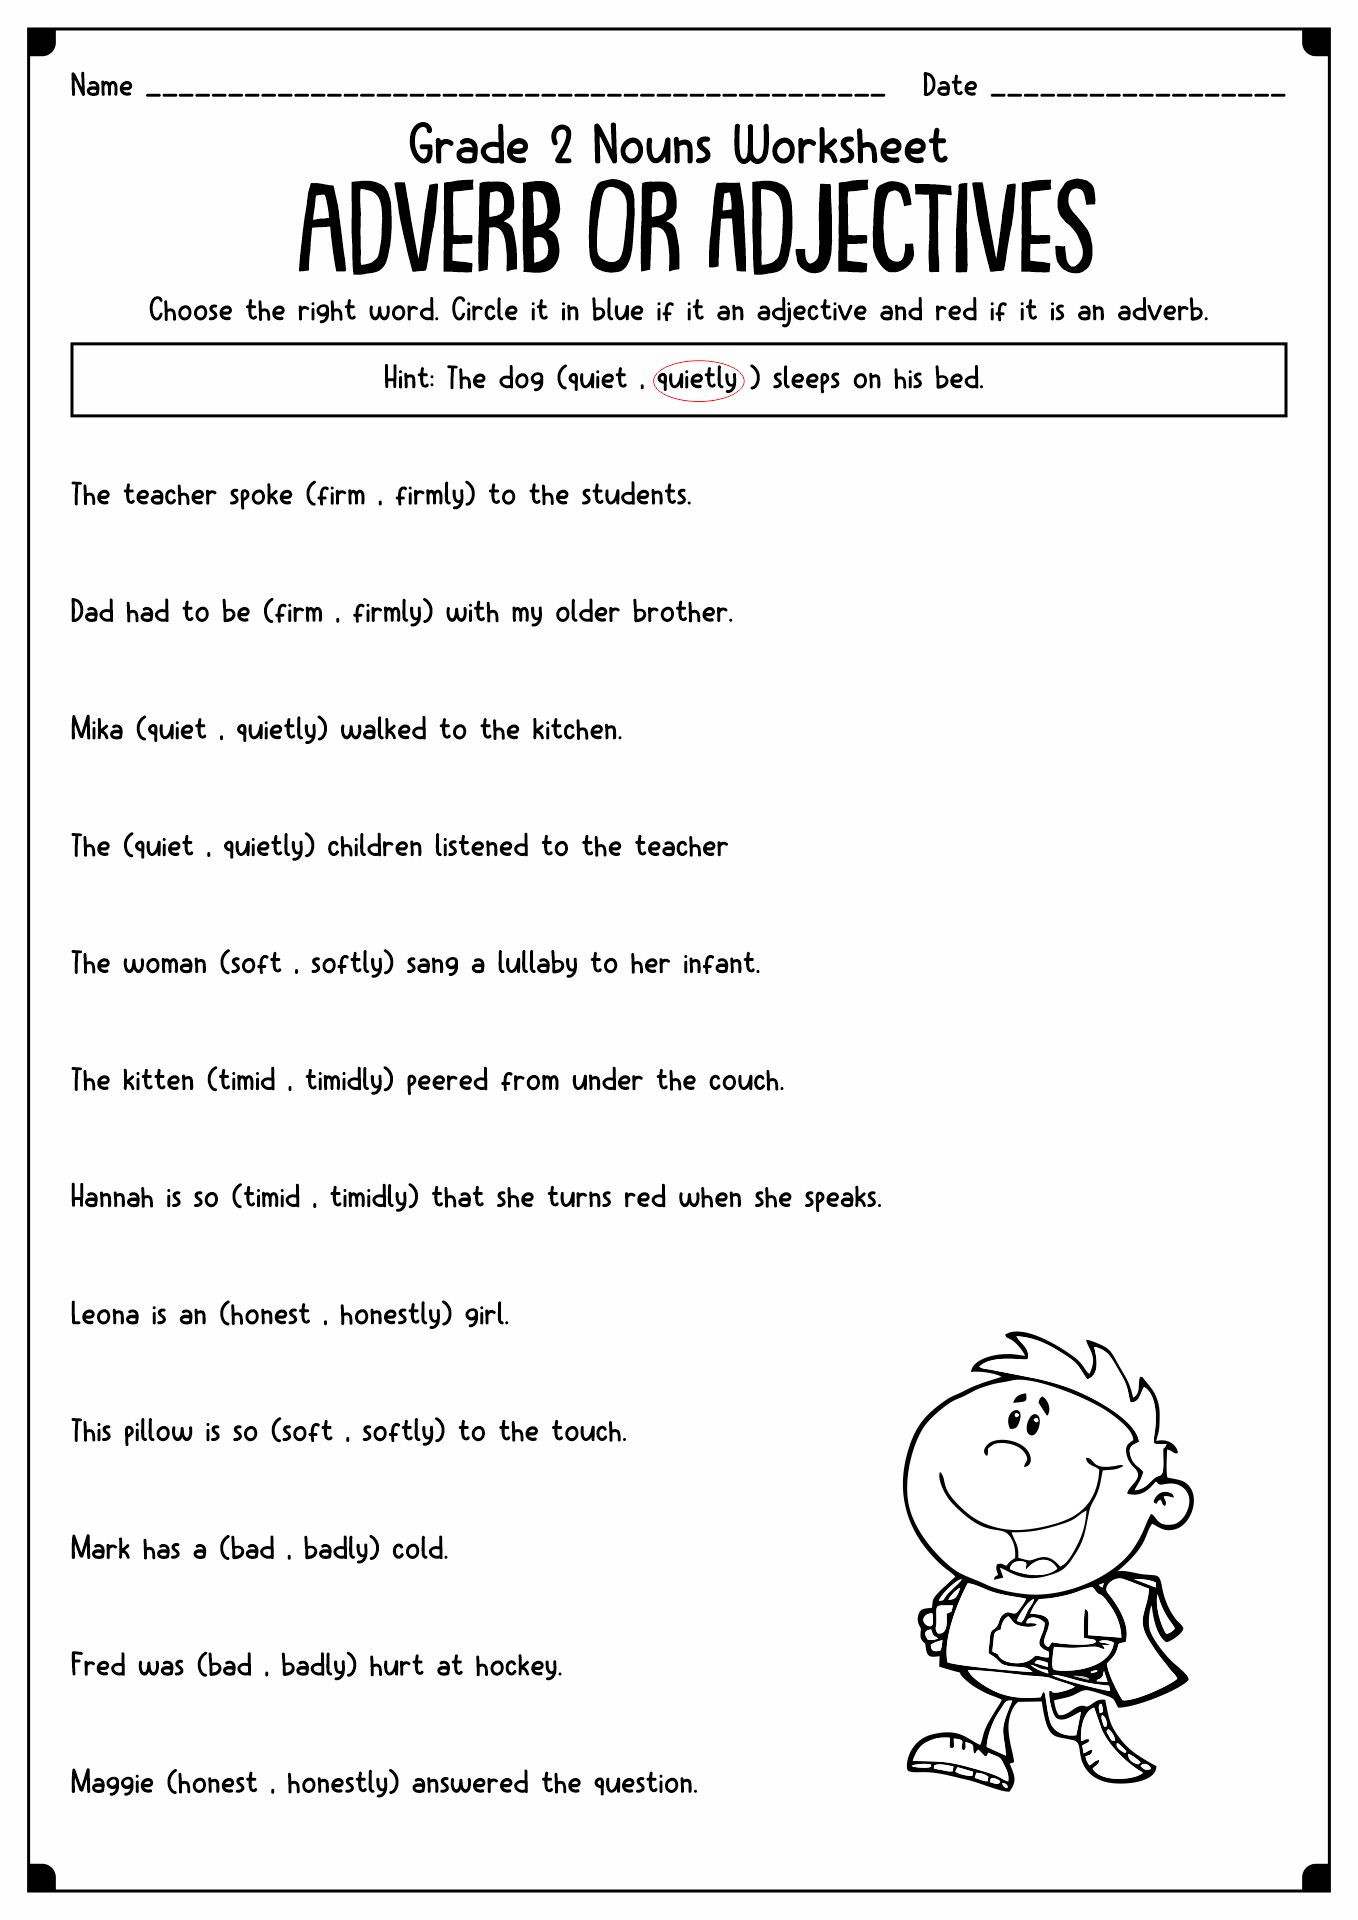 4th-grade-adjective-worksheets